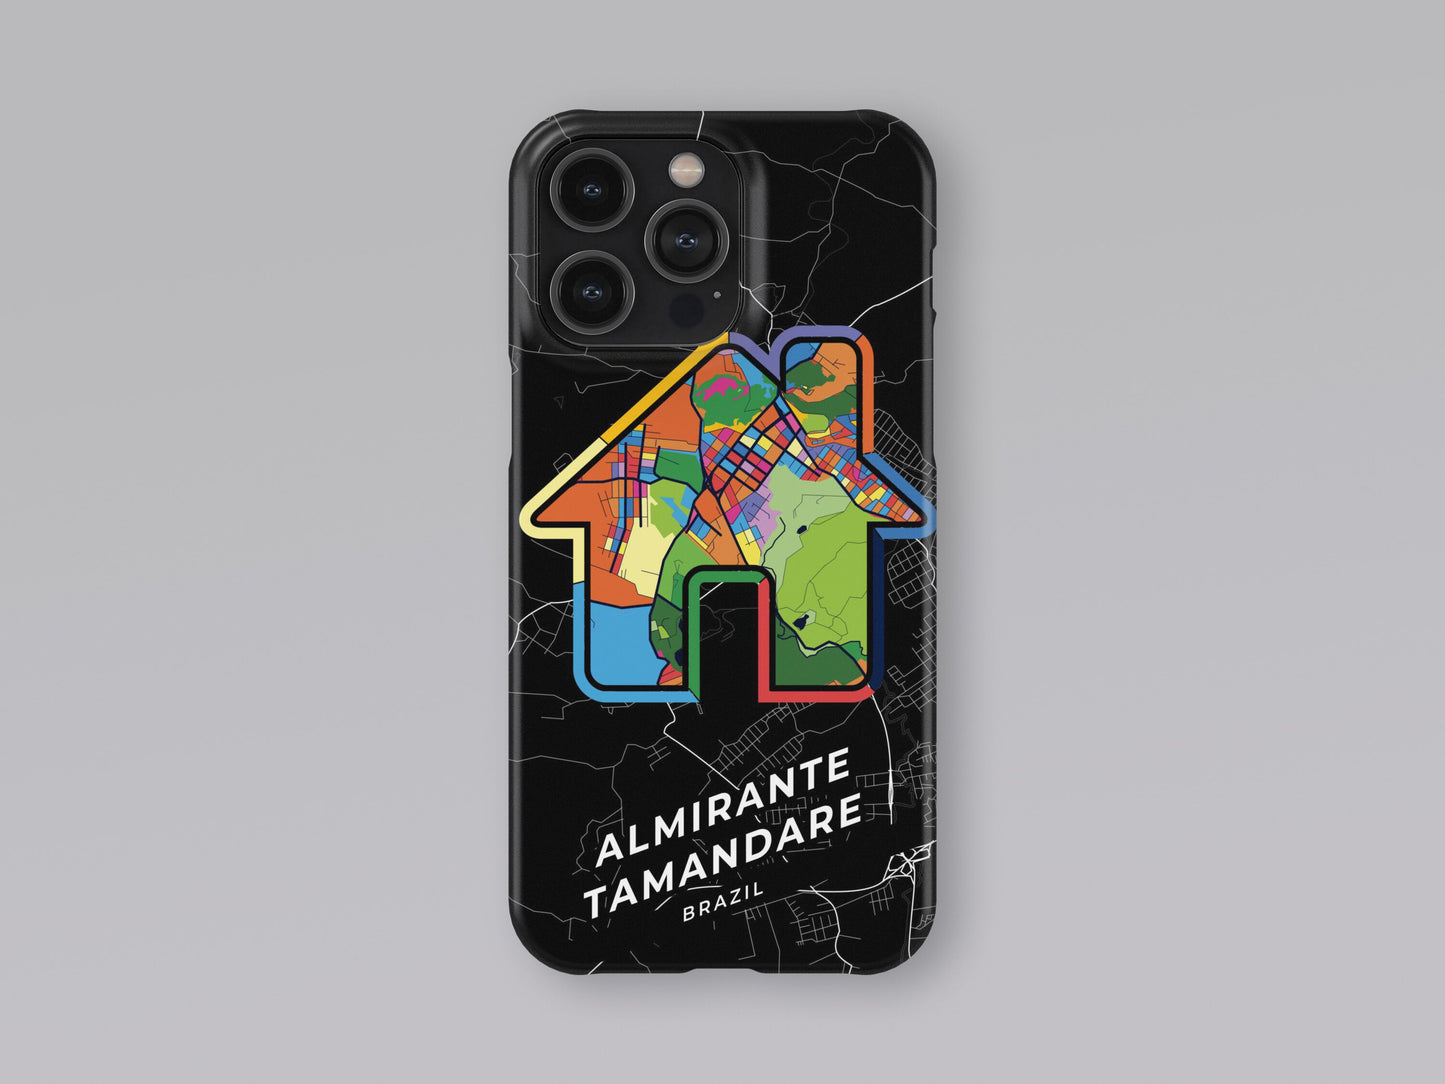 Almirante Tamandare Brazil slim phone case with colorful icon. Birthday, wedding or housewarming gift. Couple match cases. 3